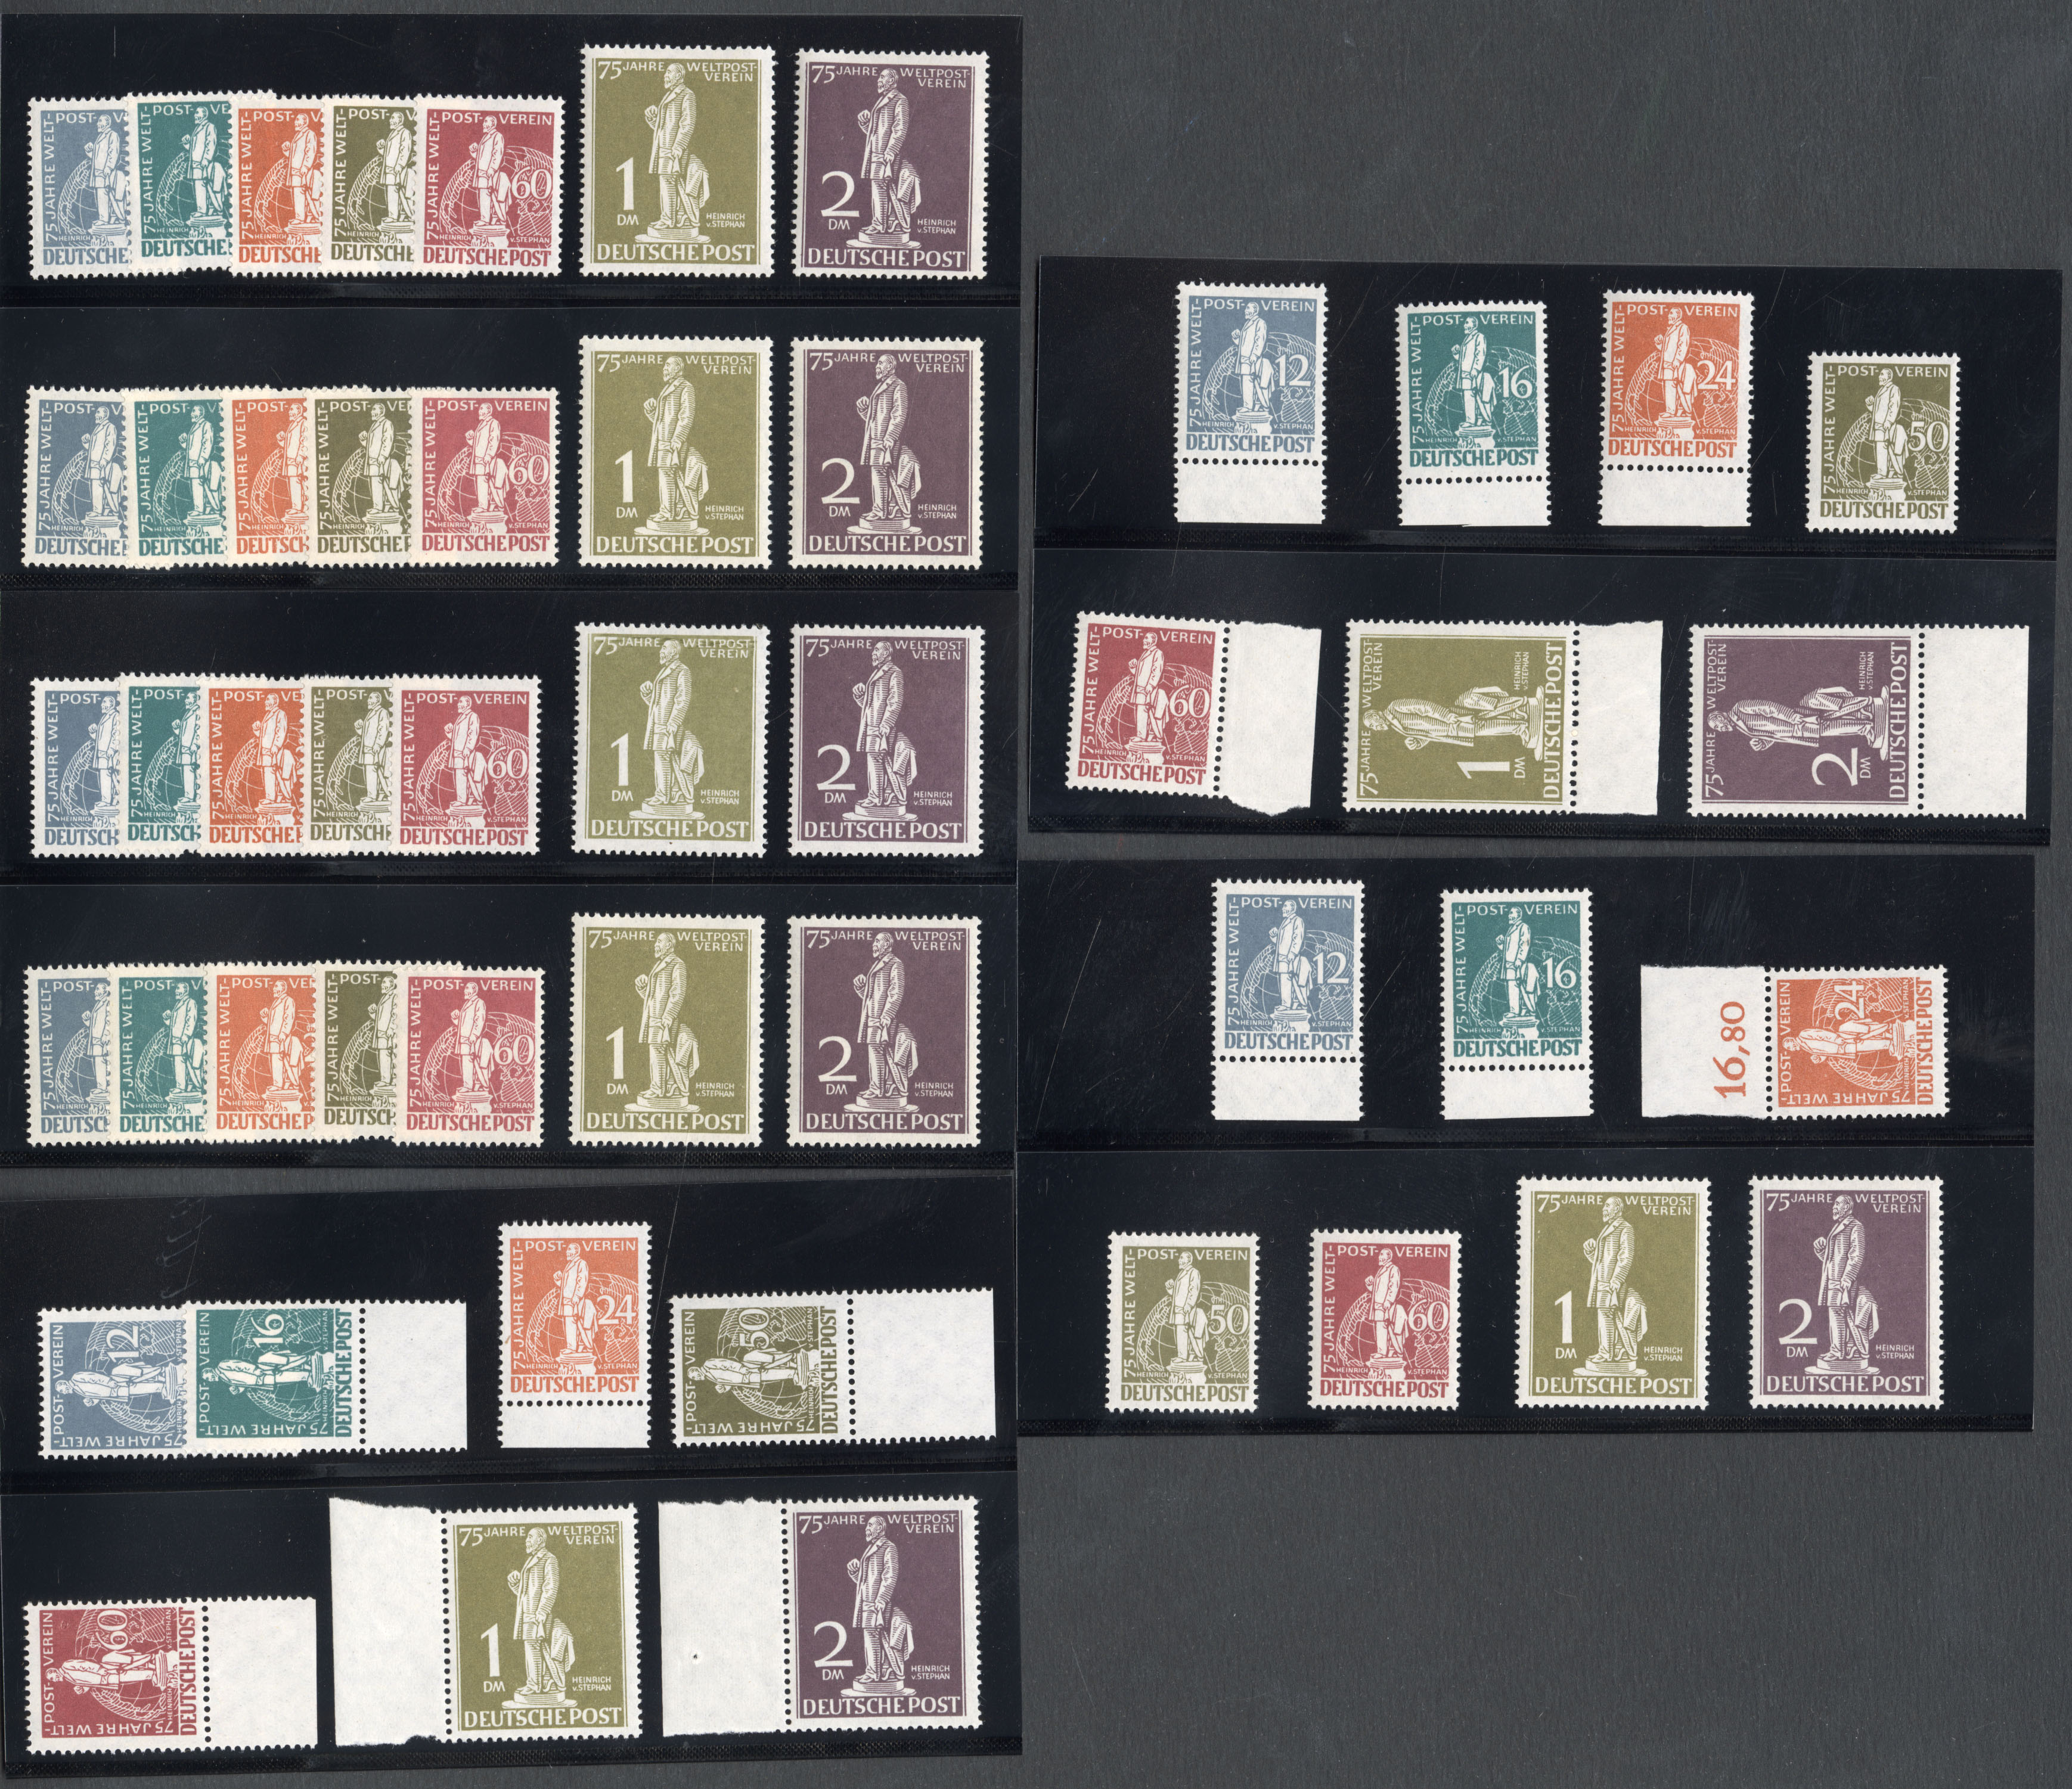 Lot 616 - ISRAEL - HOLYLAND Ottoman Empire  -  Cherrystone Auctions Rare Stamps & Postal History of the World